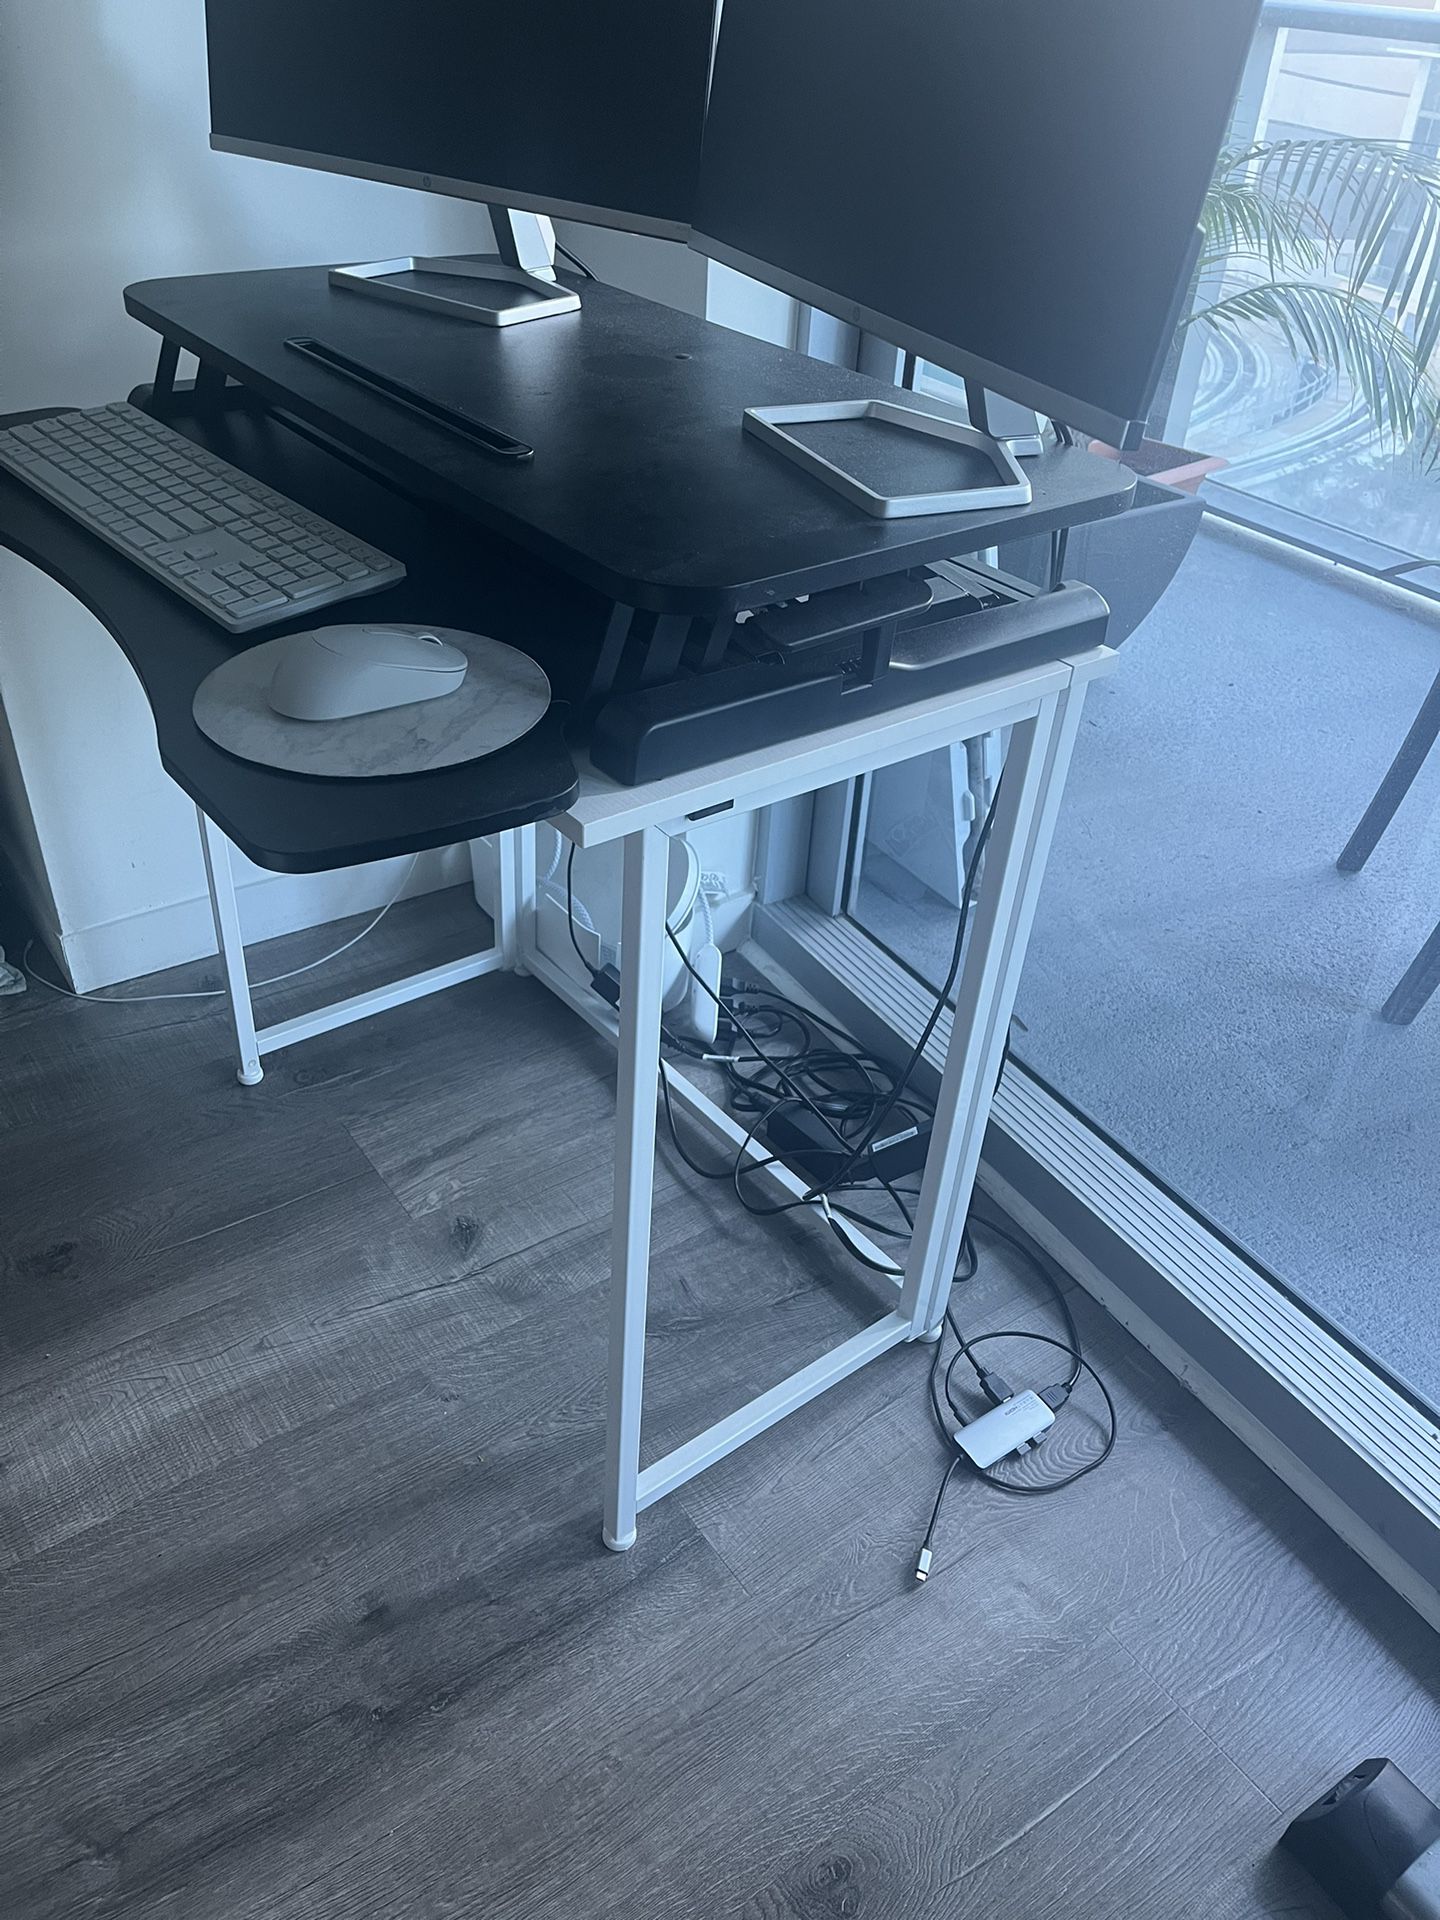 White Collapsible Desk